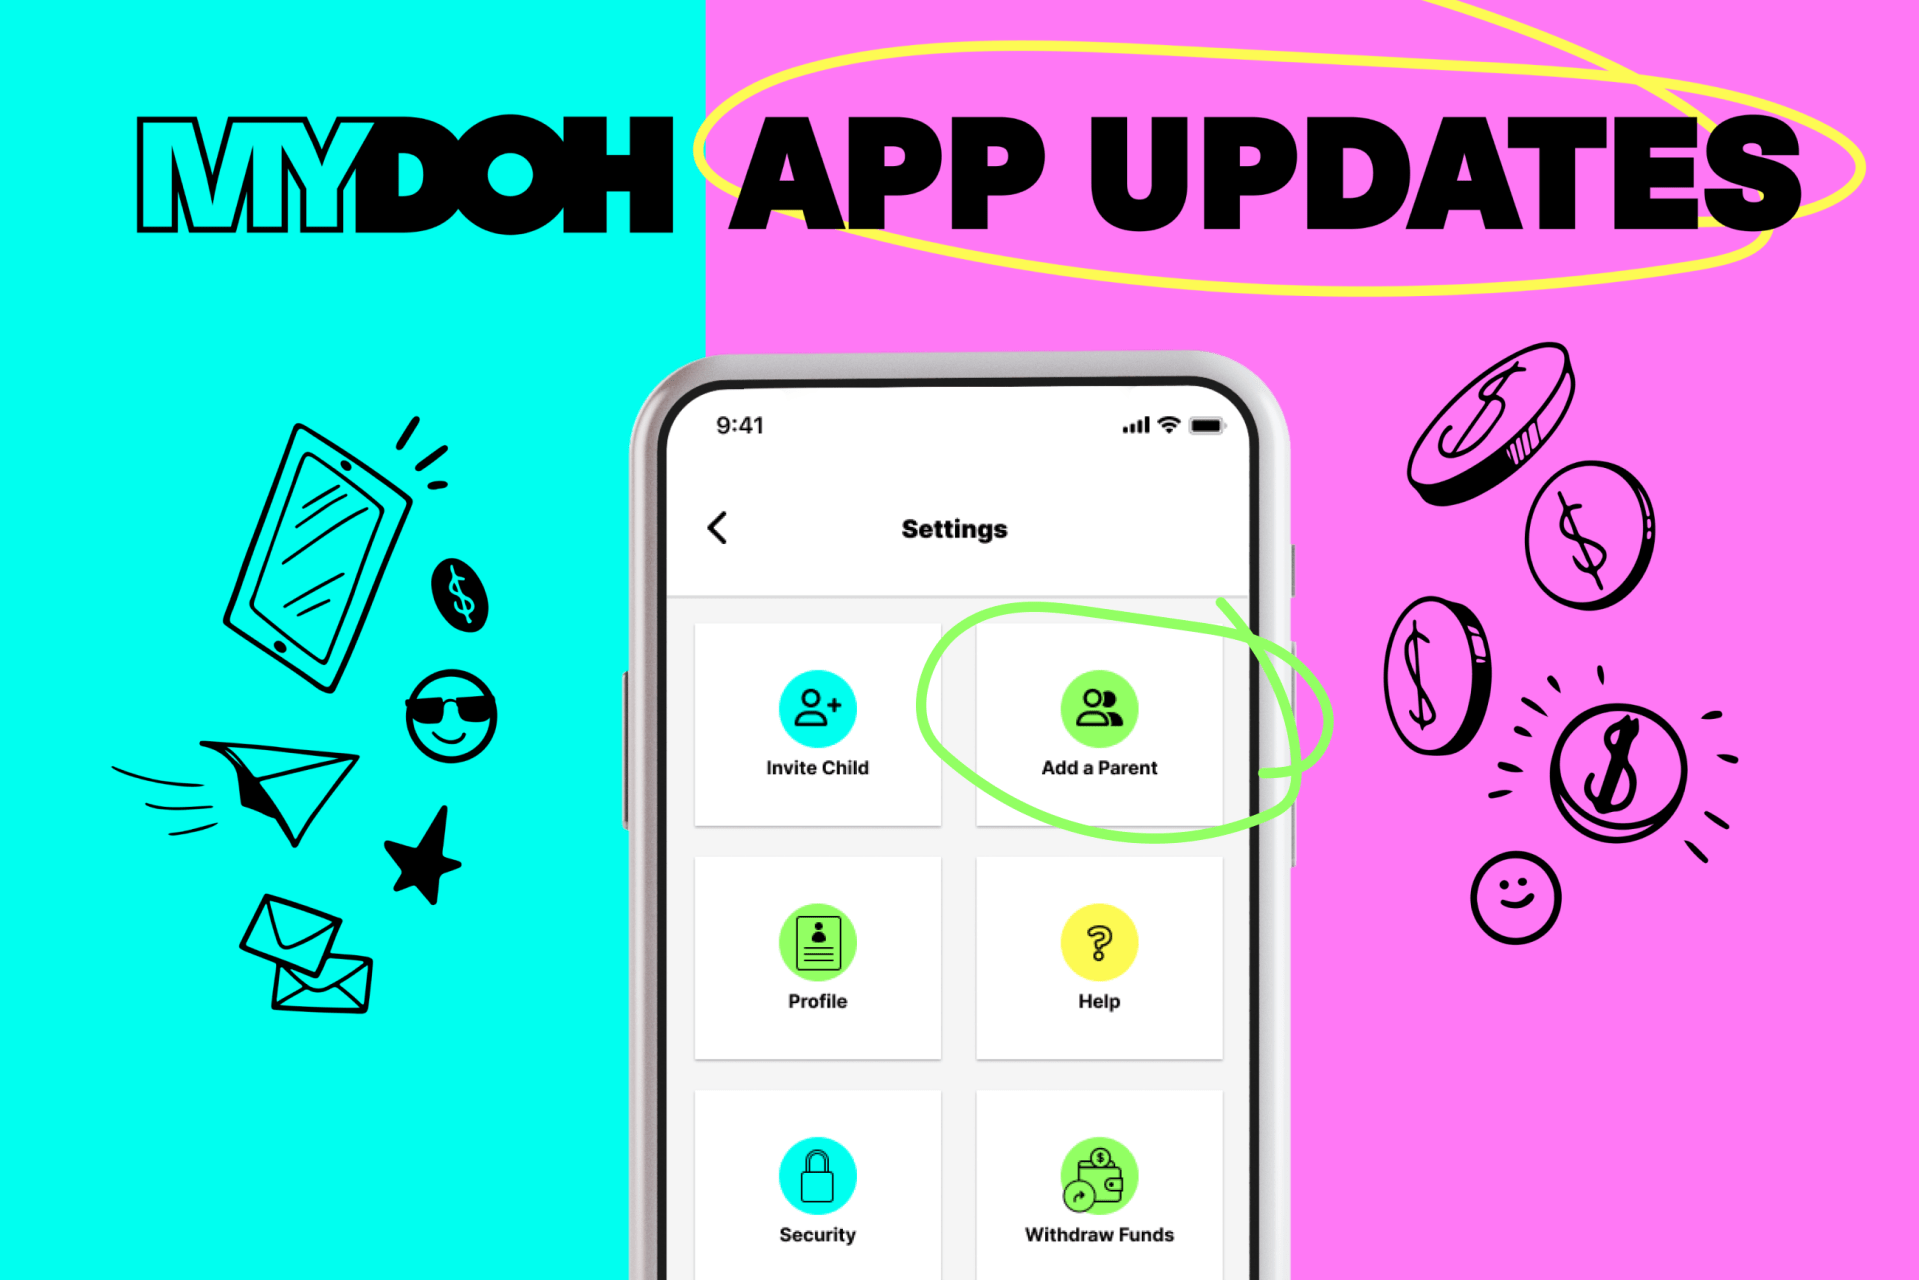 Image of Mydoh App with "Add a Parent" circled